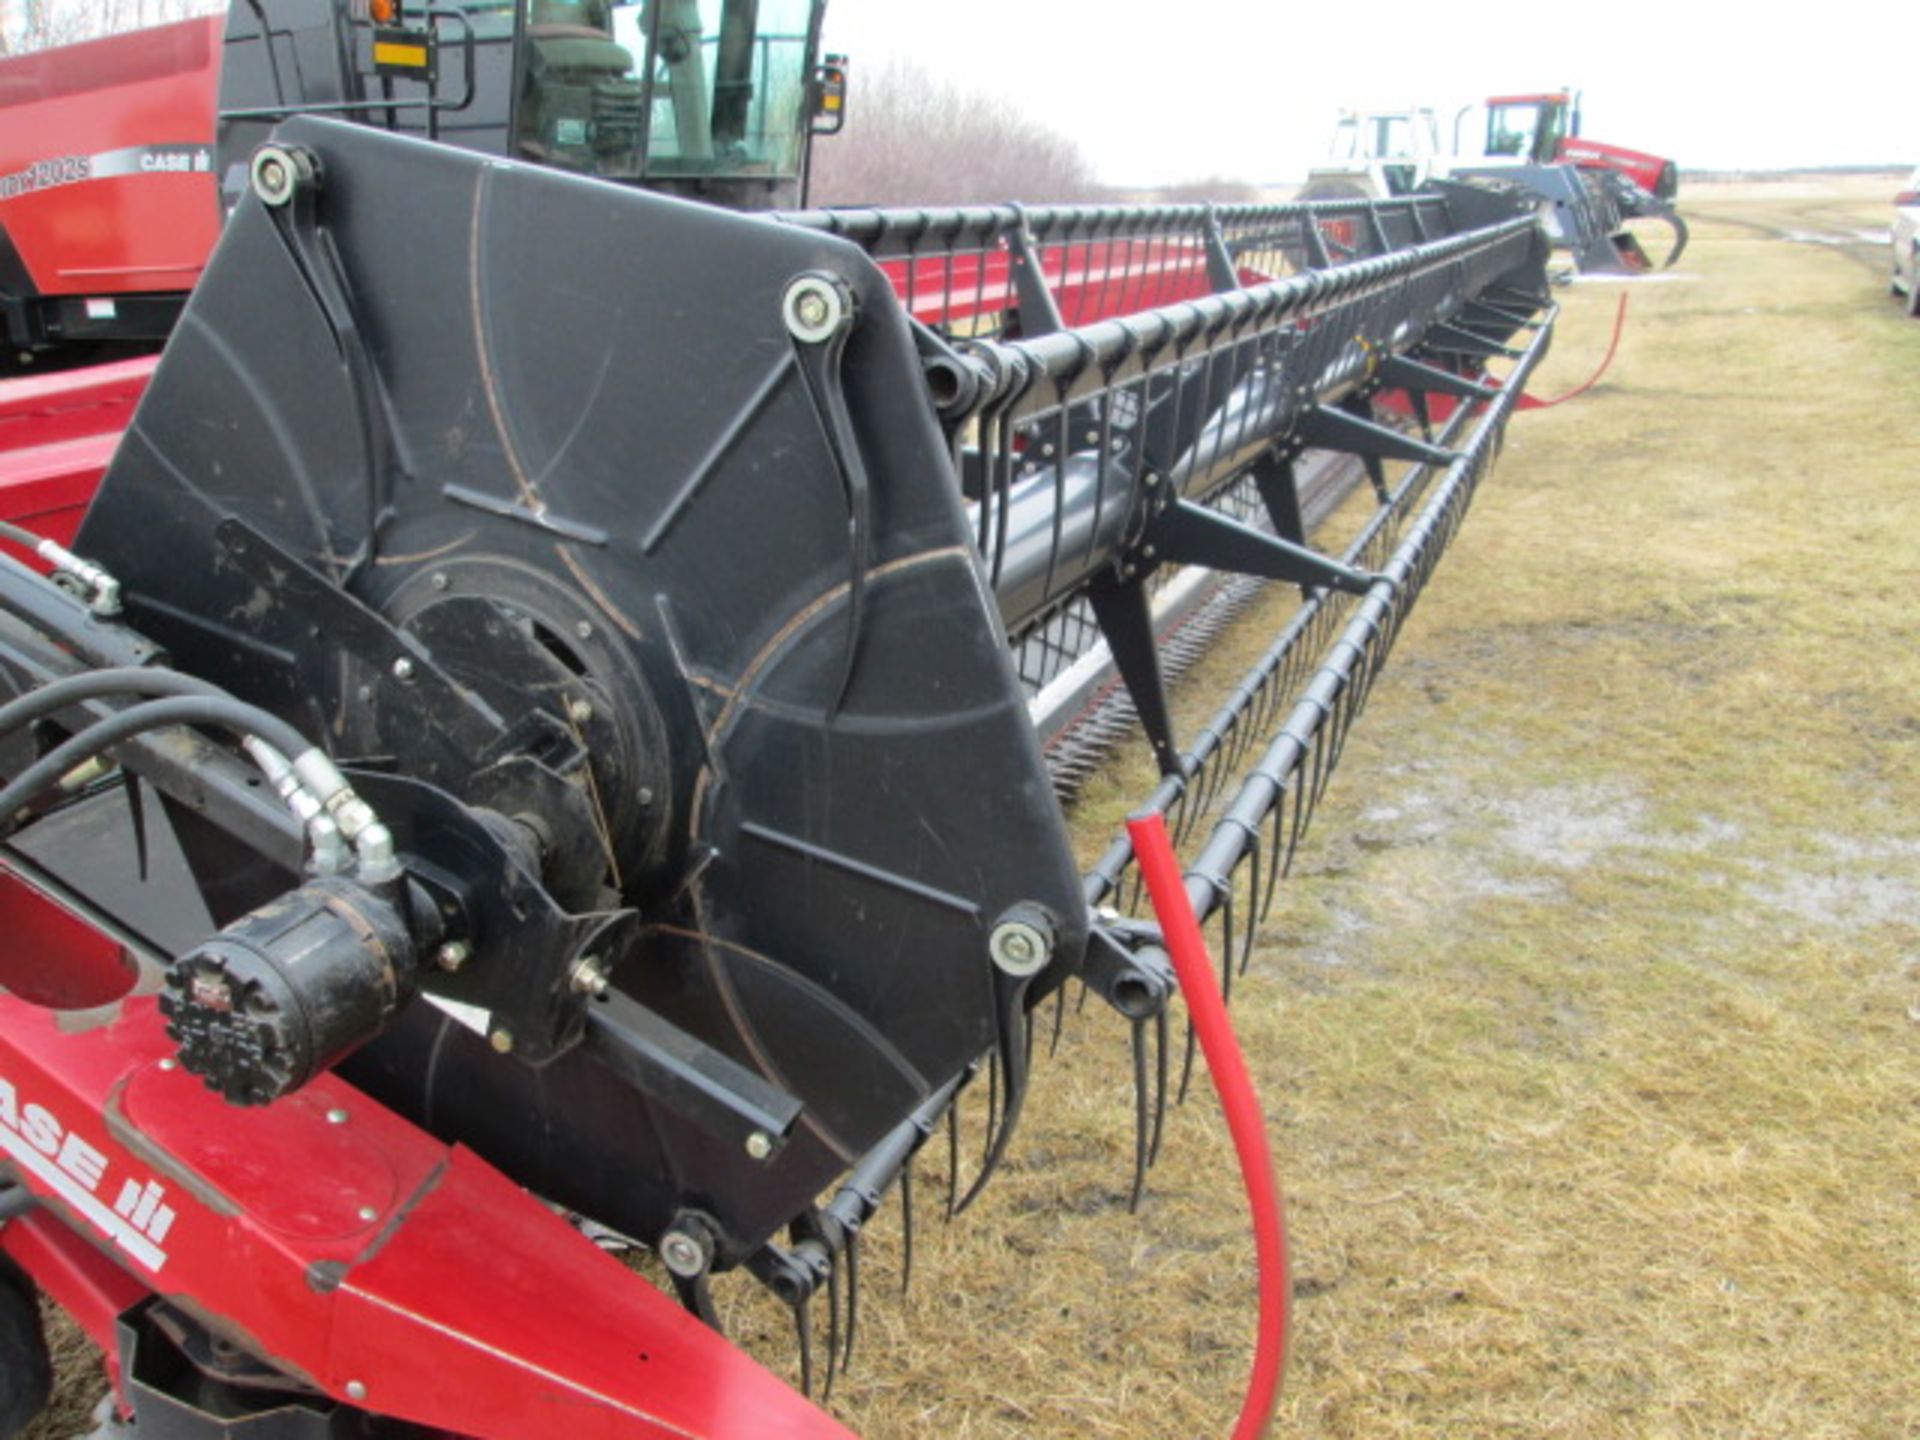 Case WDX 1202 S swather (2005), c/w 30' DHX 302 header (2007), showing 795 eng hr, dbl knife - Image 21 of 32